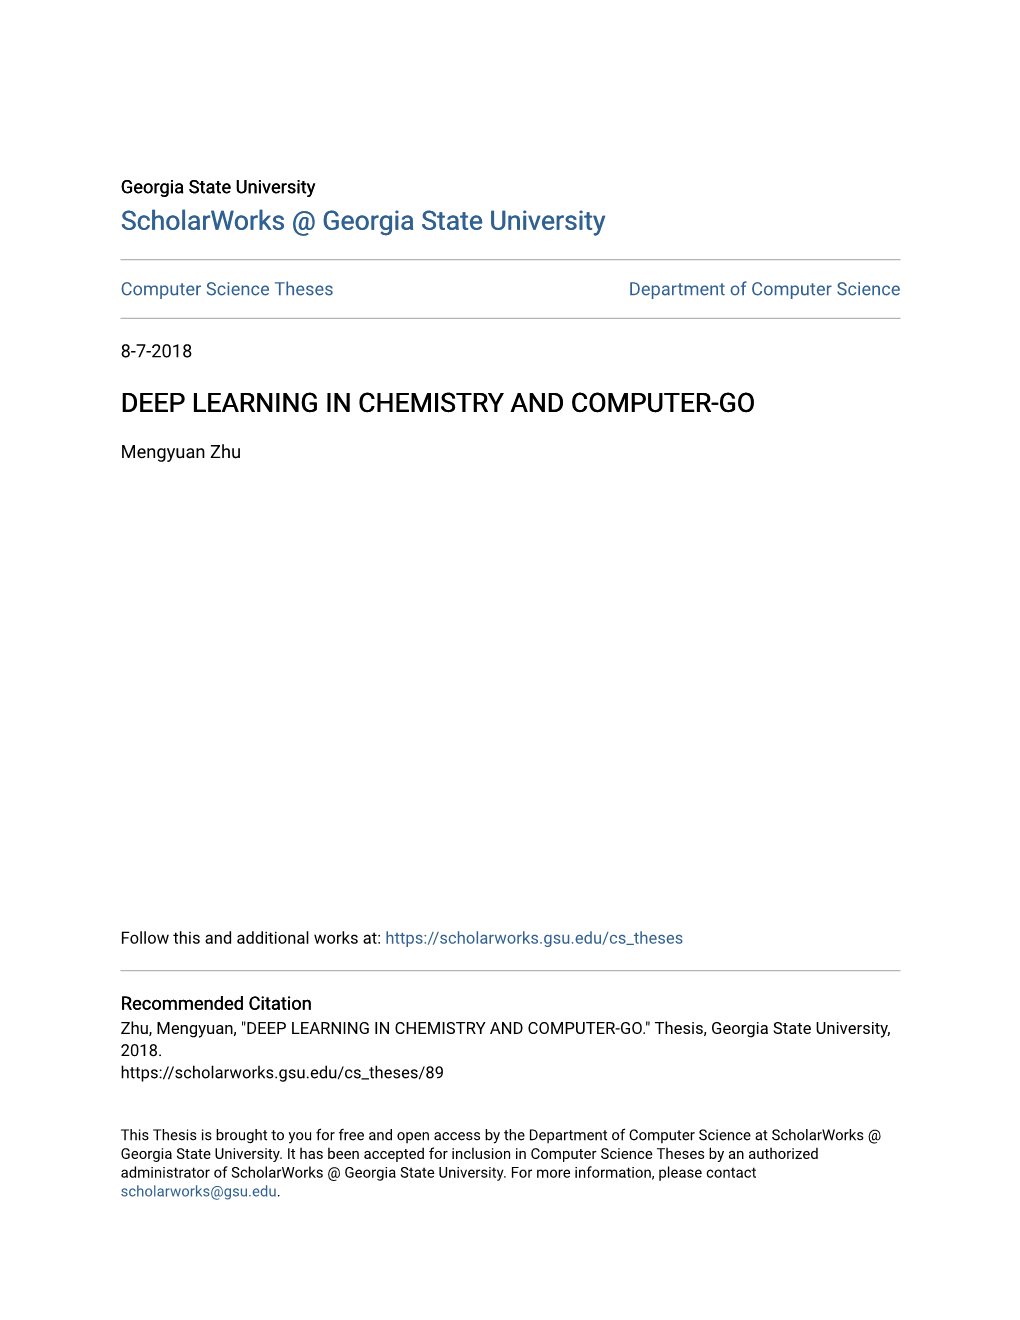 Deep Learning in Chemistry and Computer-Go